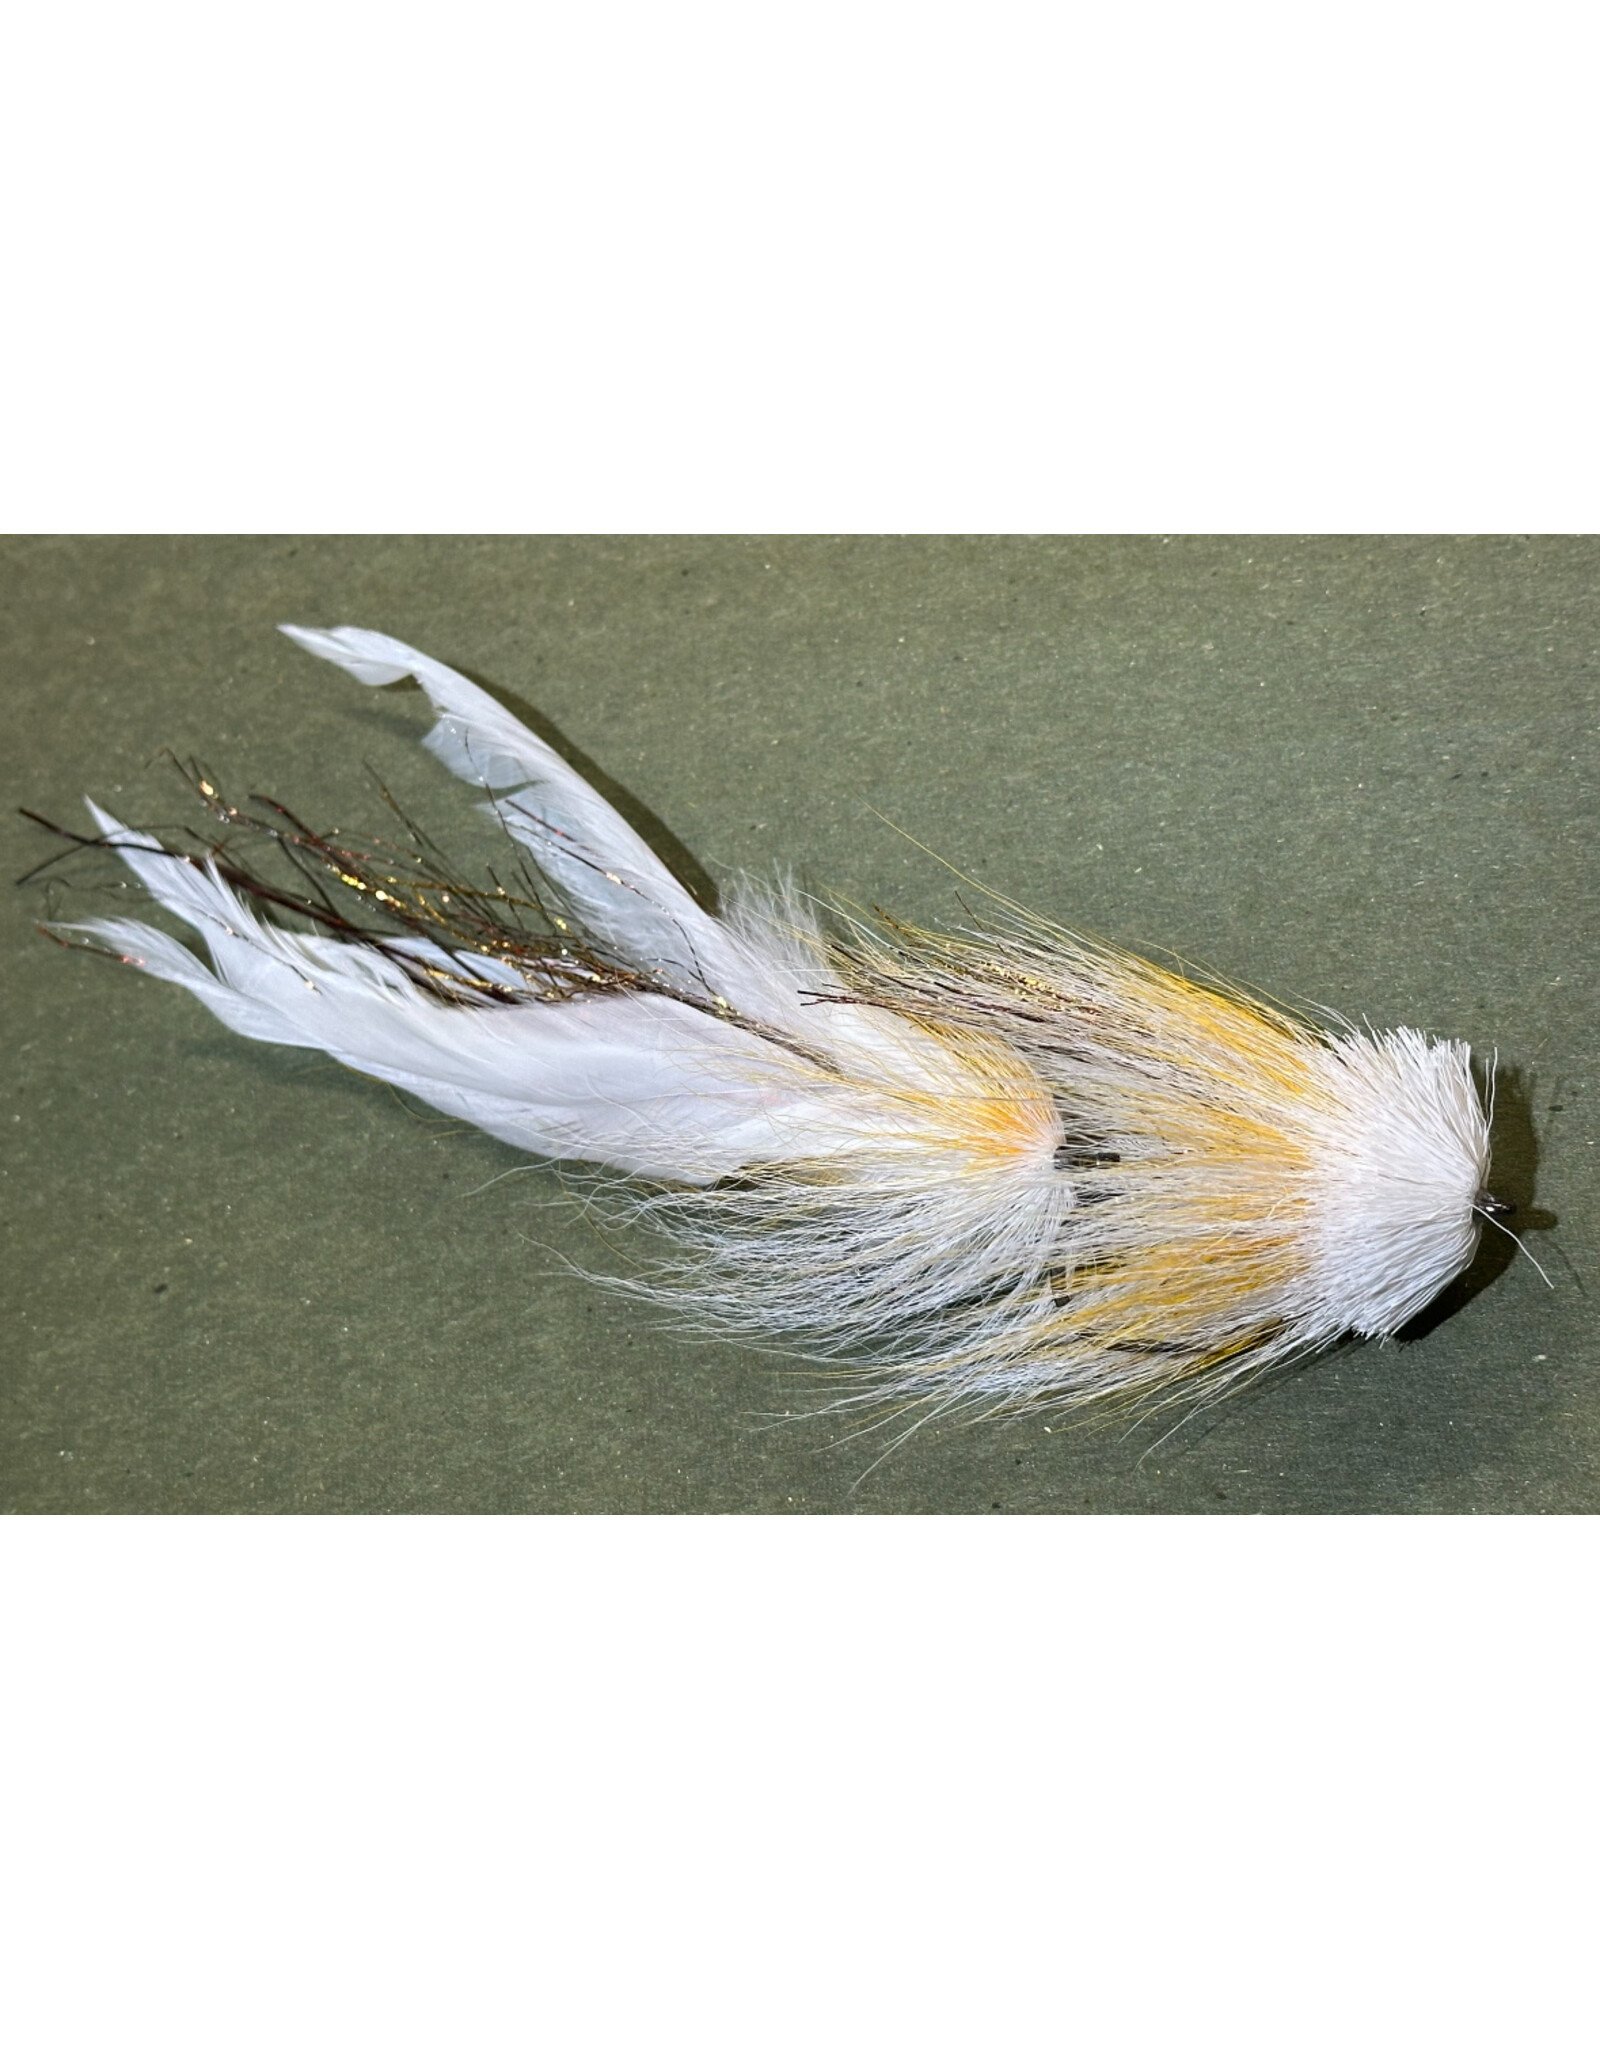 Evan's Flies DOUBLE BUFORD PIKE/MUSKY FLY 8-10" - WHITE/GINGER/GOLD